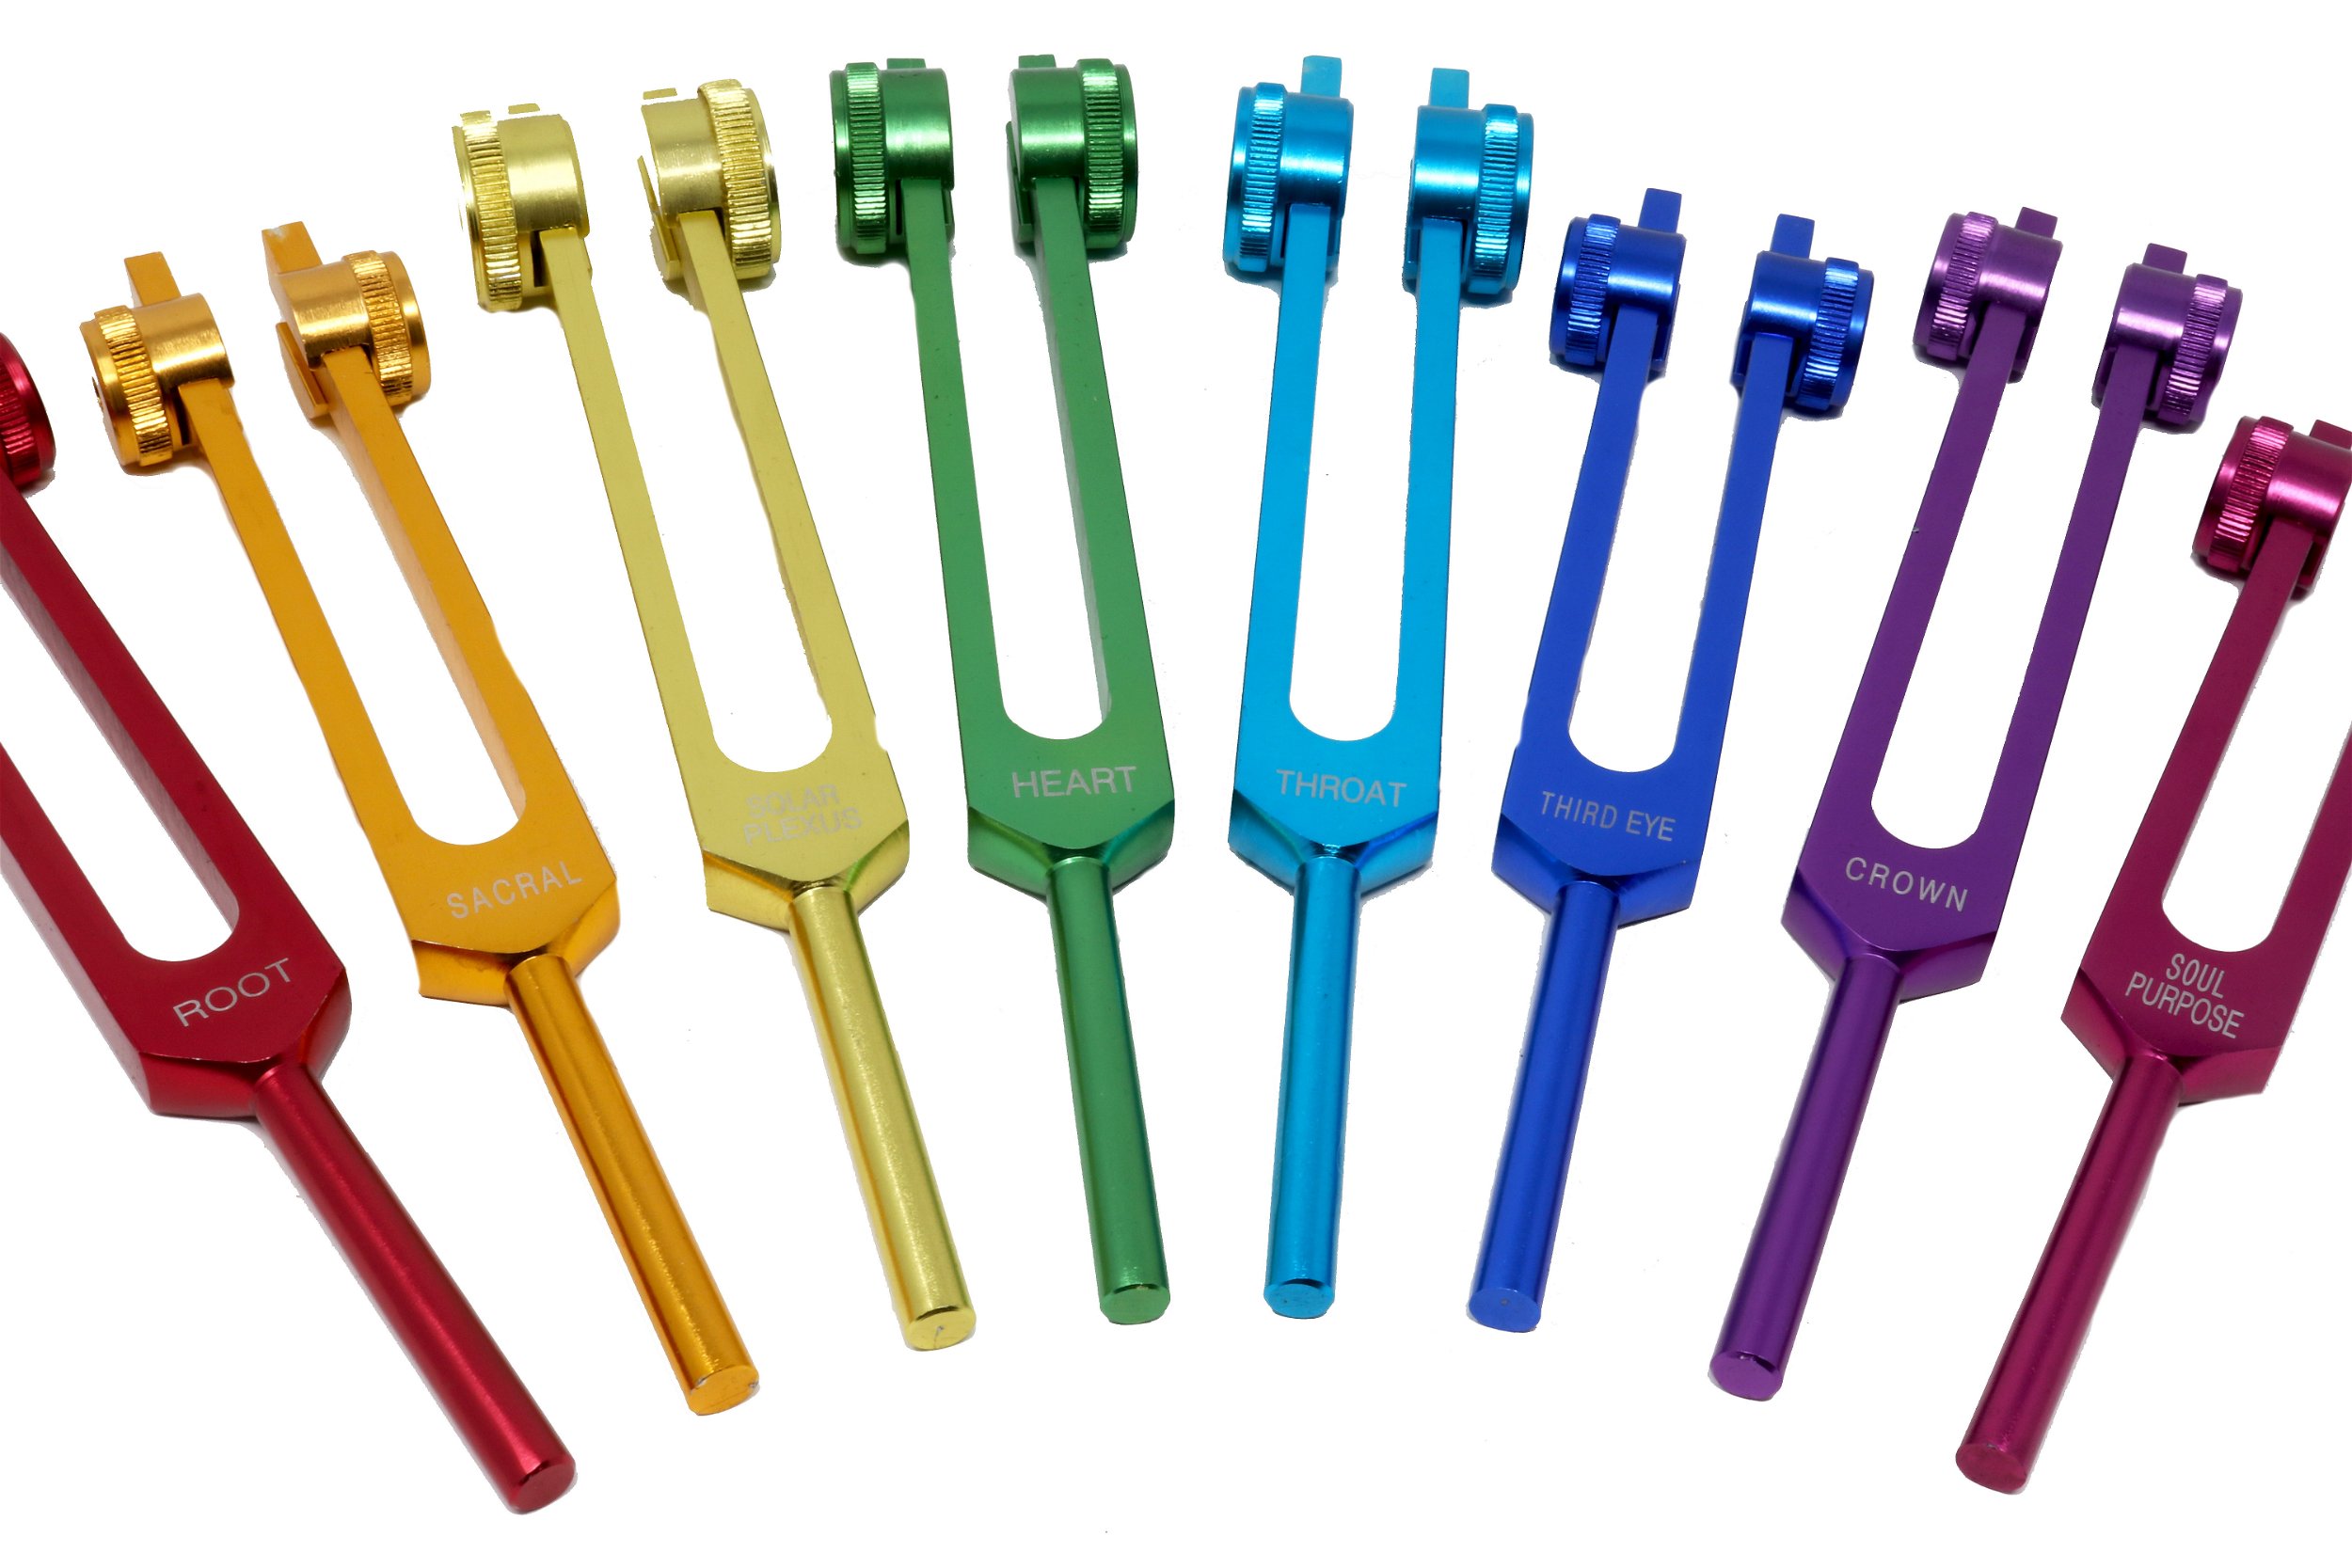 Colored Metal Tuning Forks - Set of 8